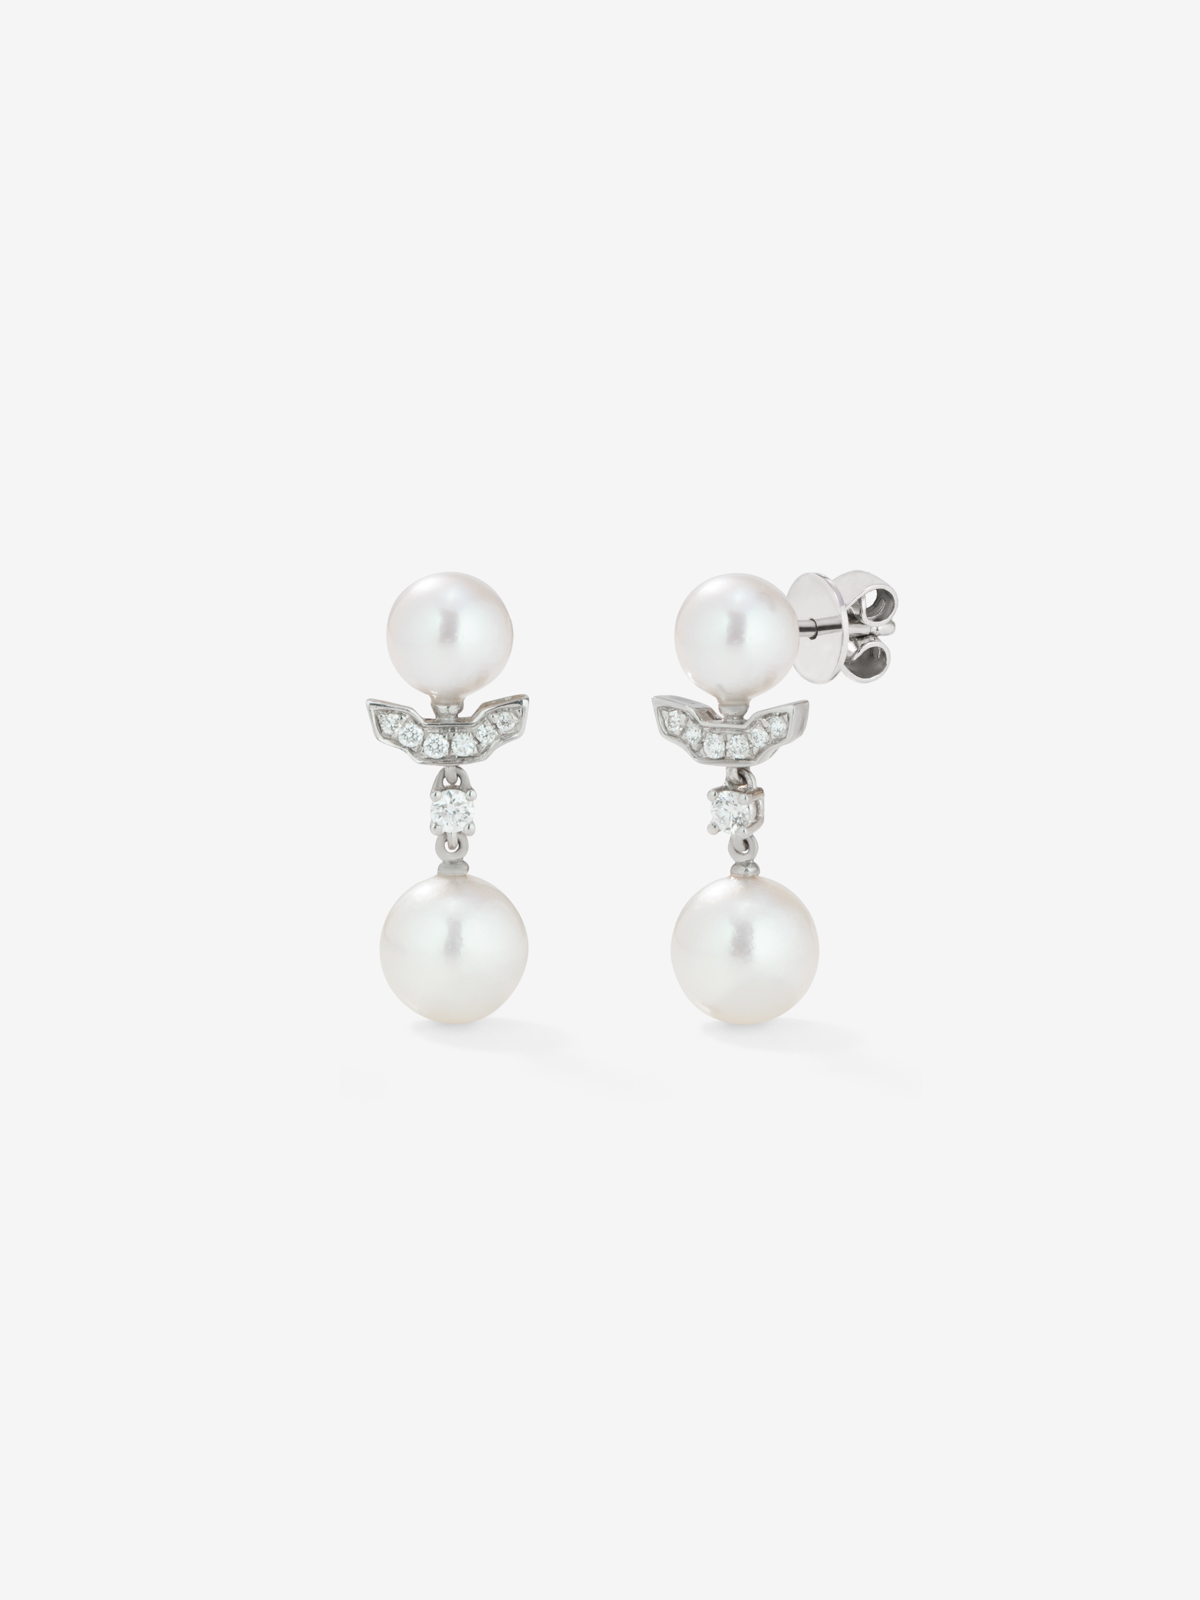 Small 18k white gold earring with Akoya pearls and diamonds.